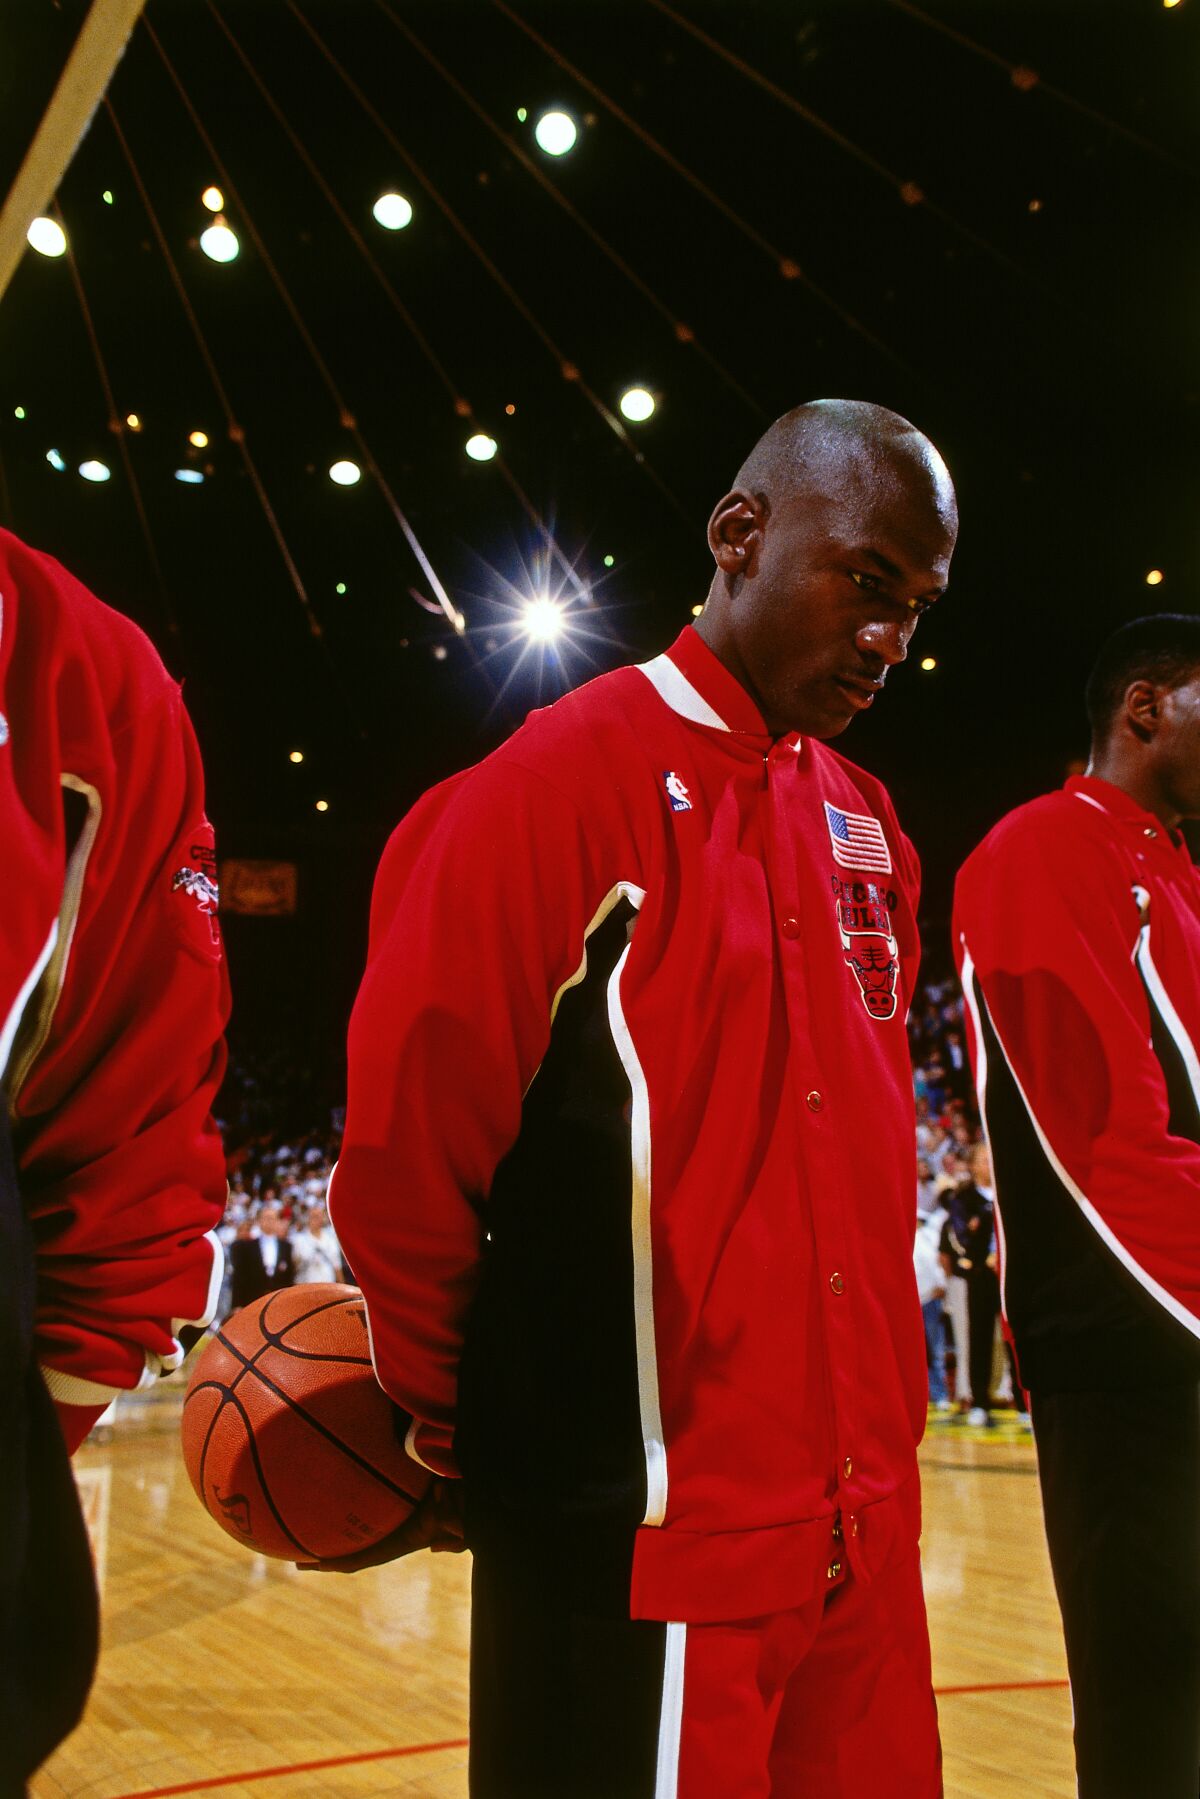 Michael Jordan stands for the National Anthem during the 1991 NBA Finals, as featured in the documentary "The Last Dance."